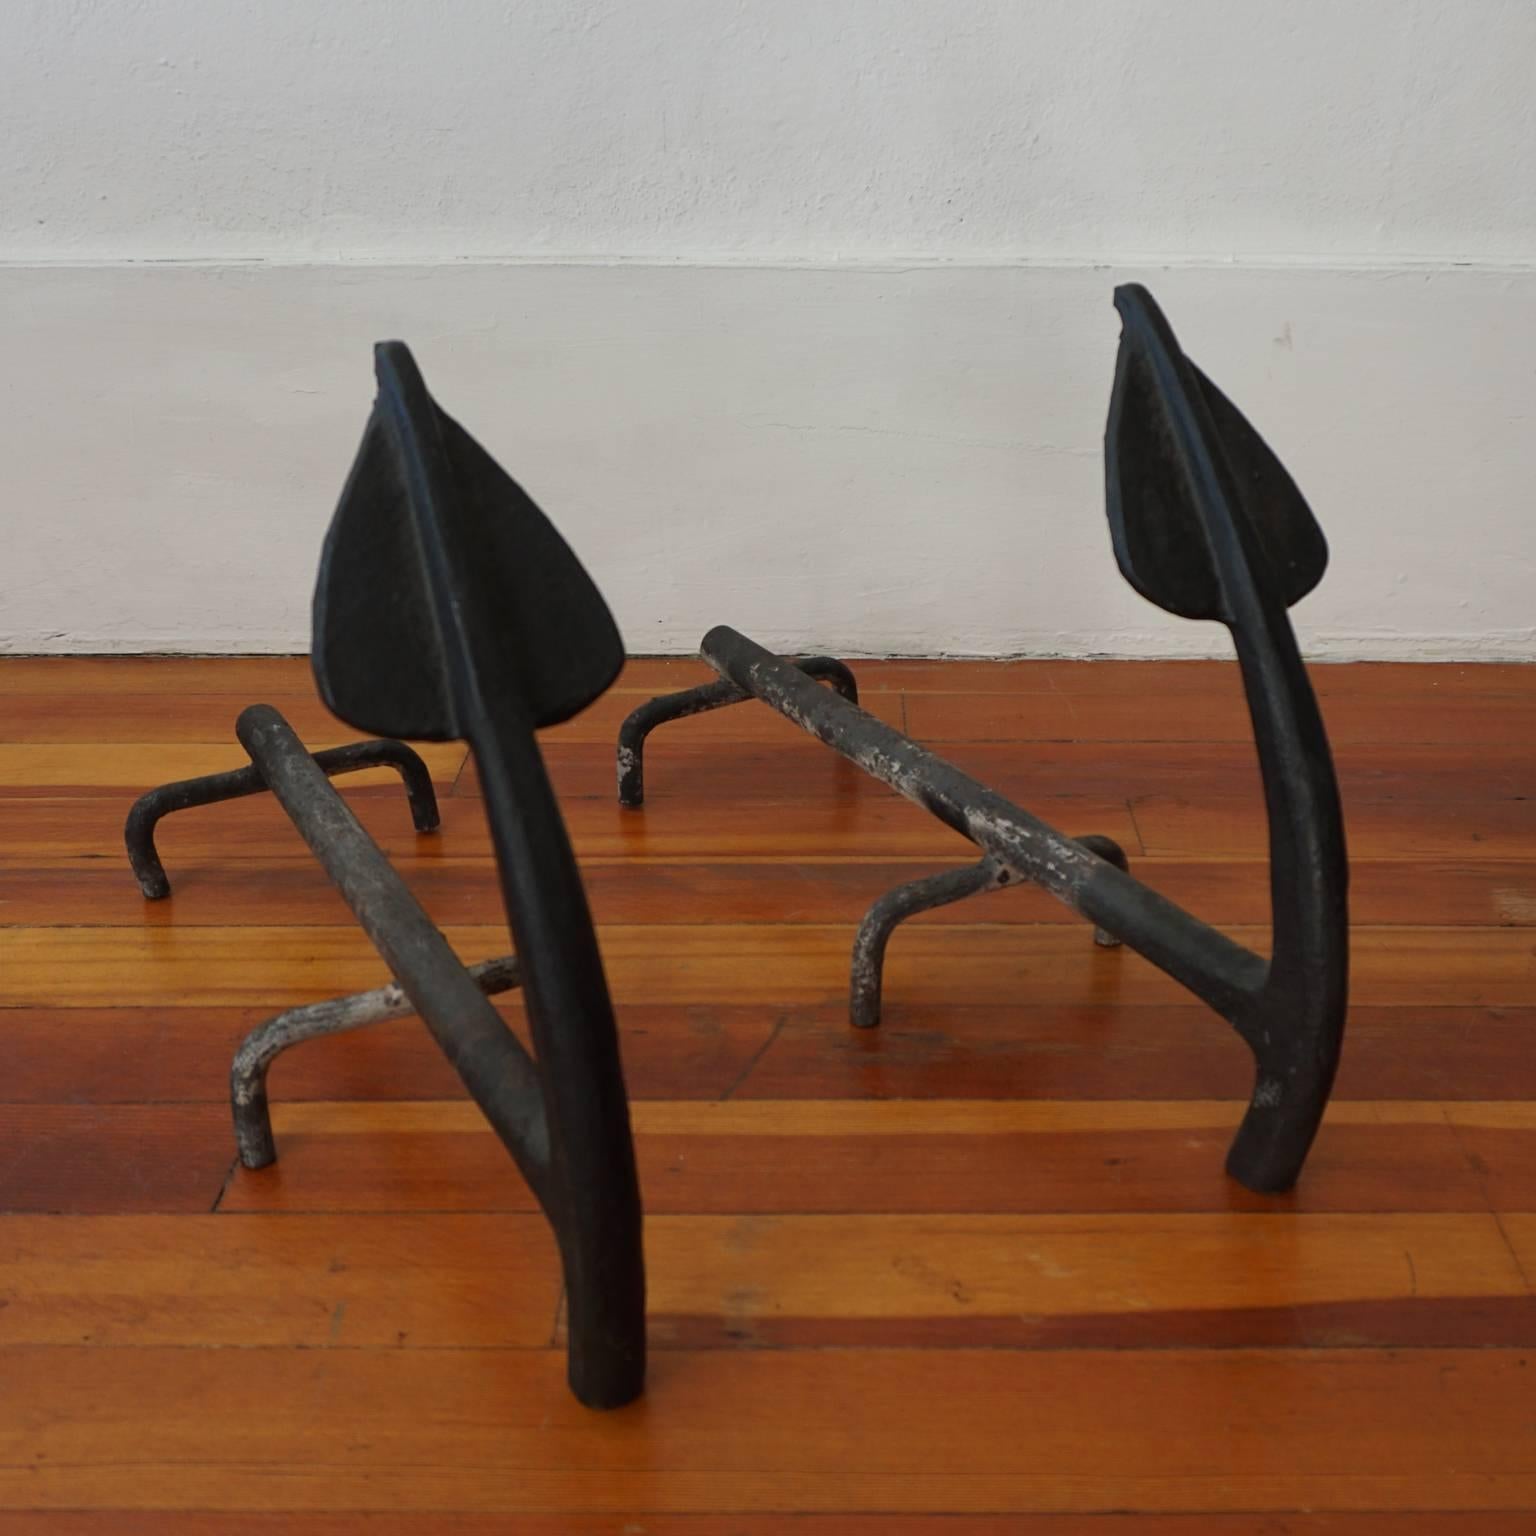 A pair of solid iron andirons from the 1940s.